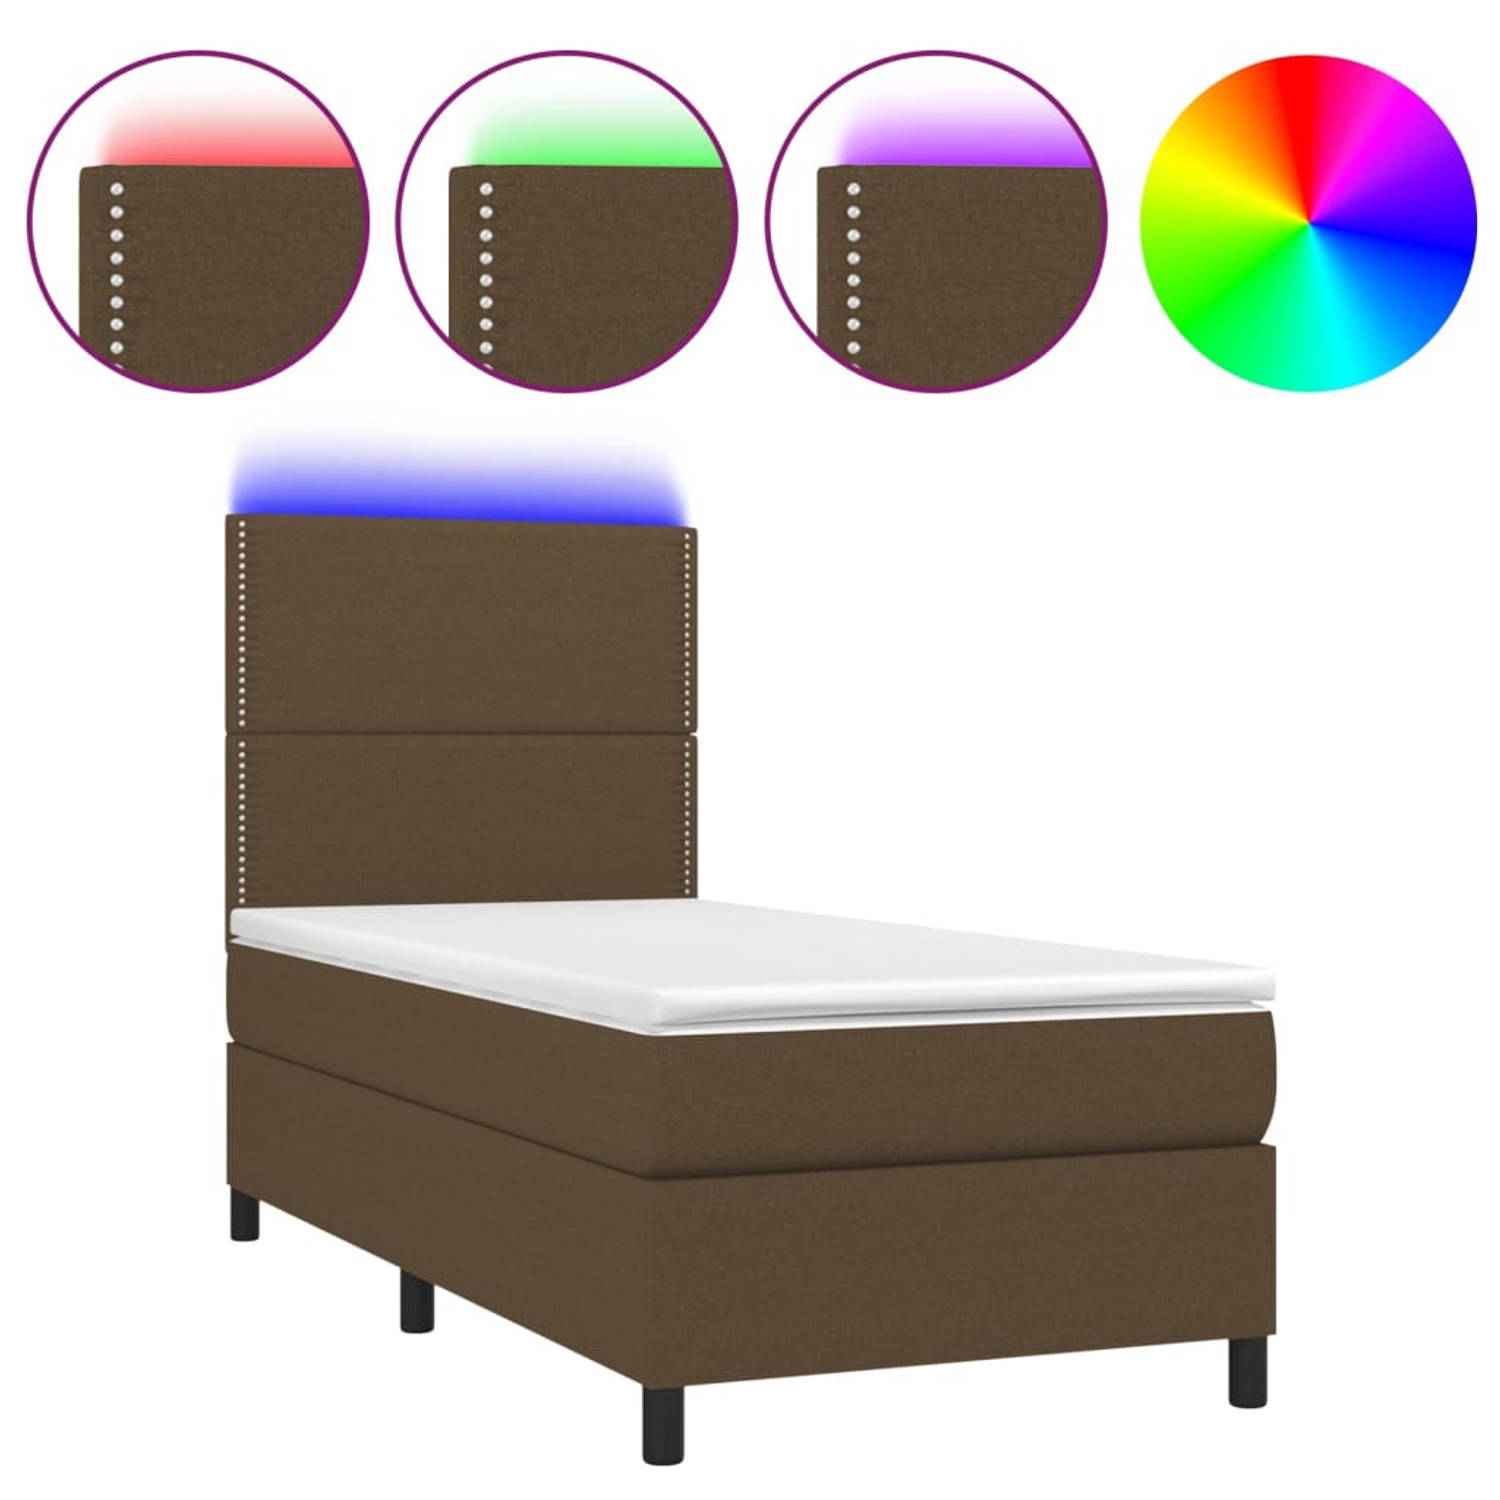 The Living Store Bed - Boxspringcombinatie - 203x90x118/128 cm - Donkerbruin - Met LED-verlichting